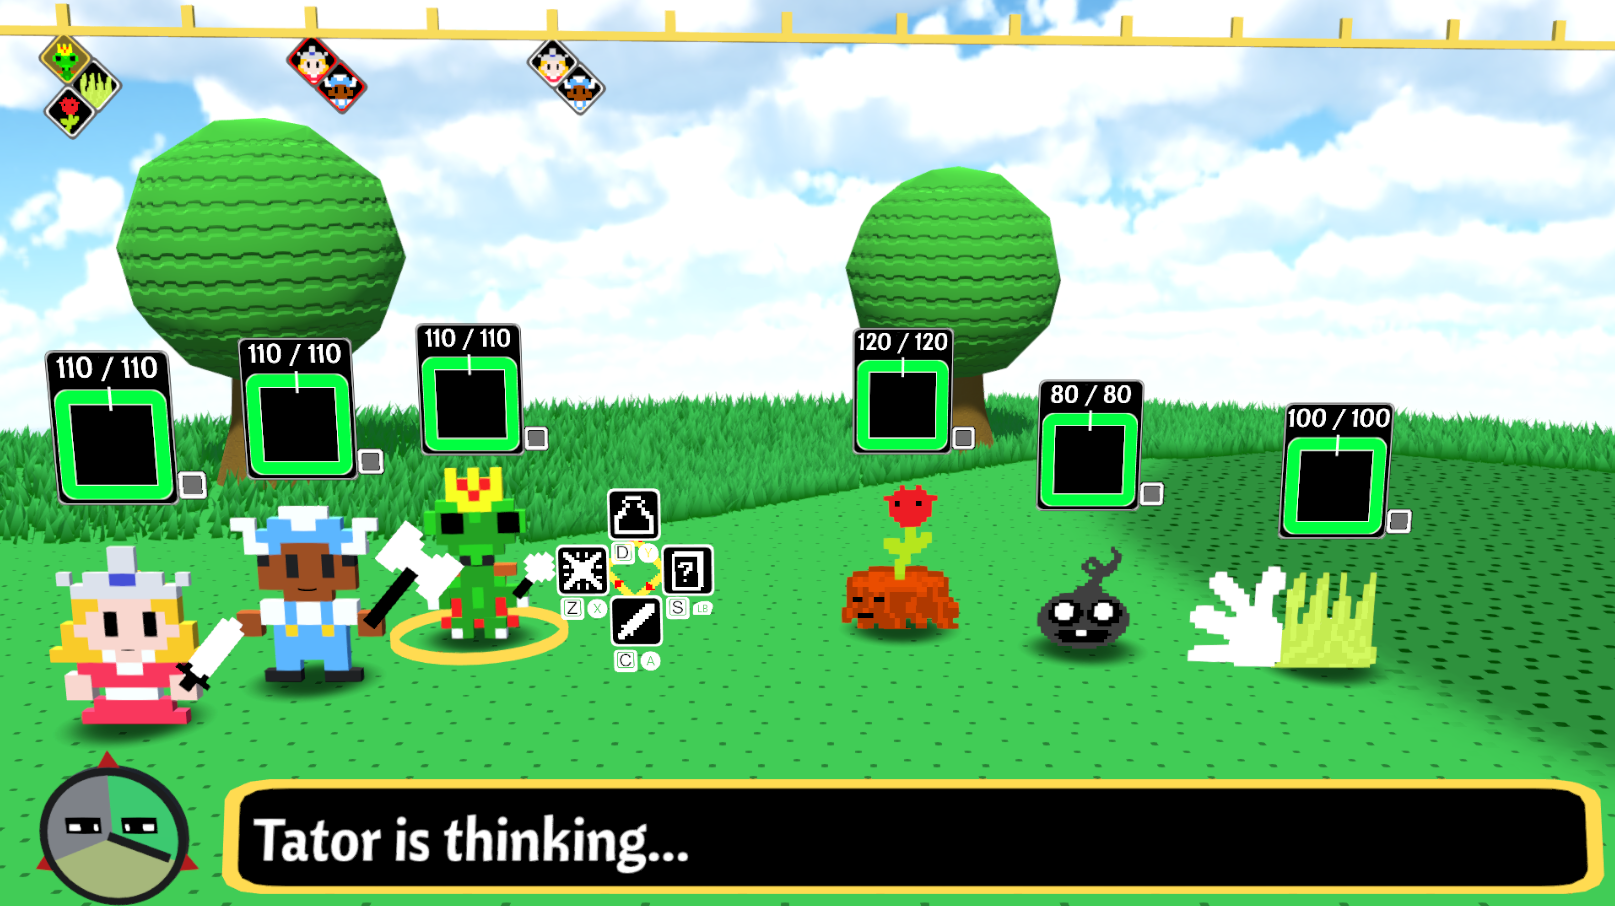 Screenshot of the game. The party faces off against a stump creature, a black blob, and a grass creature.